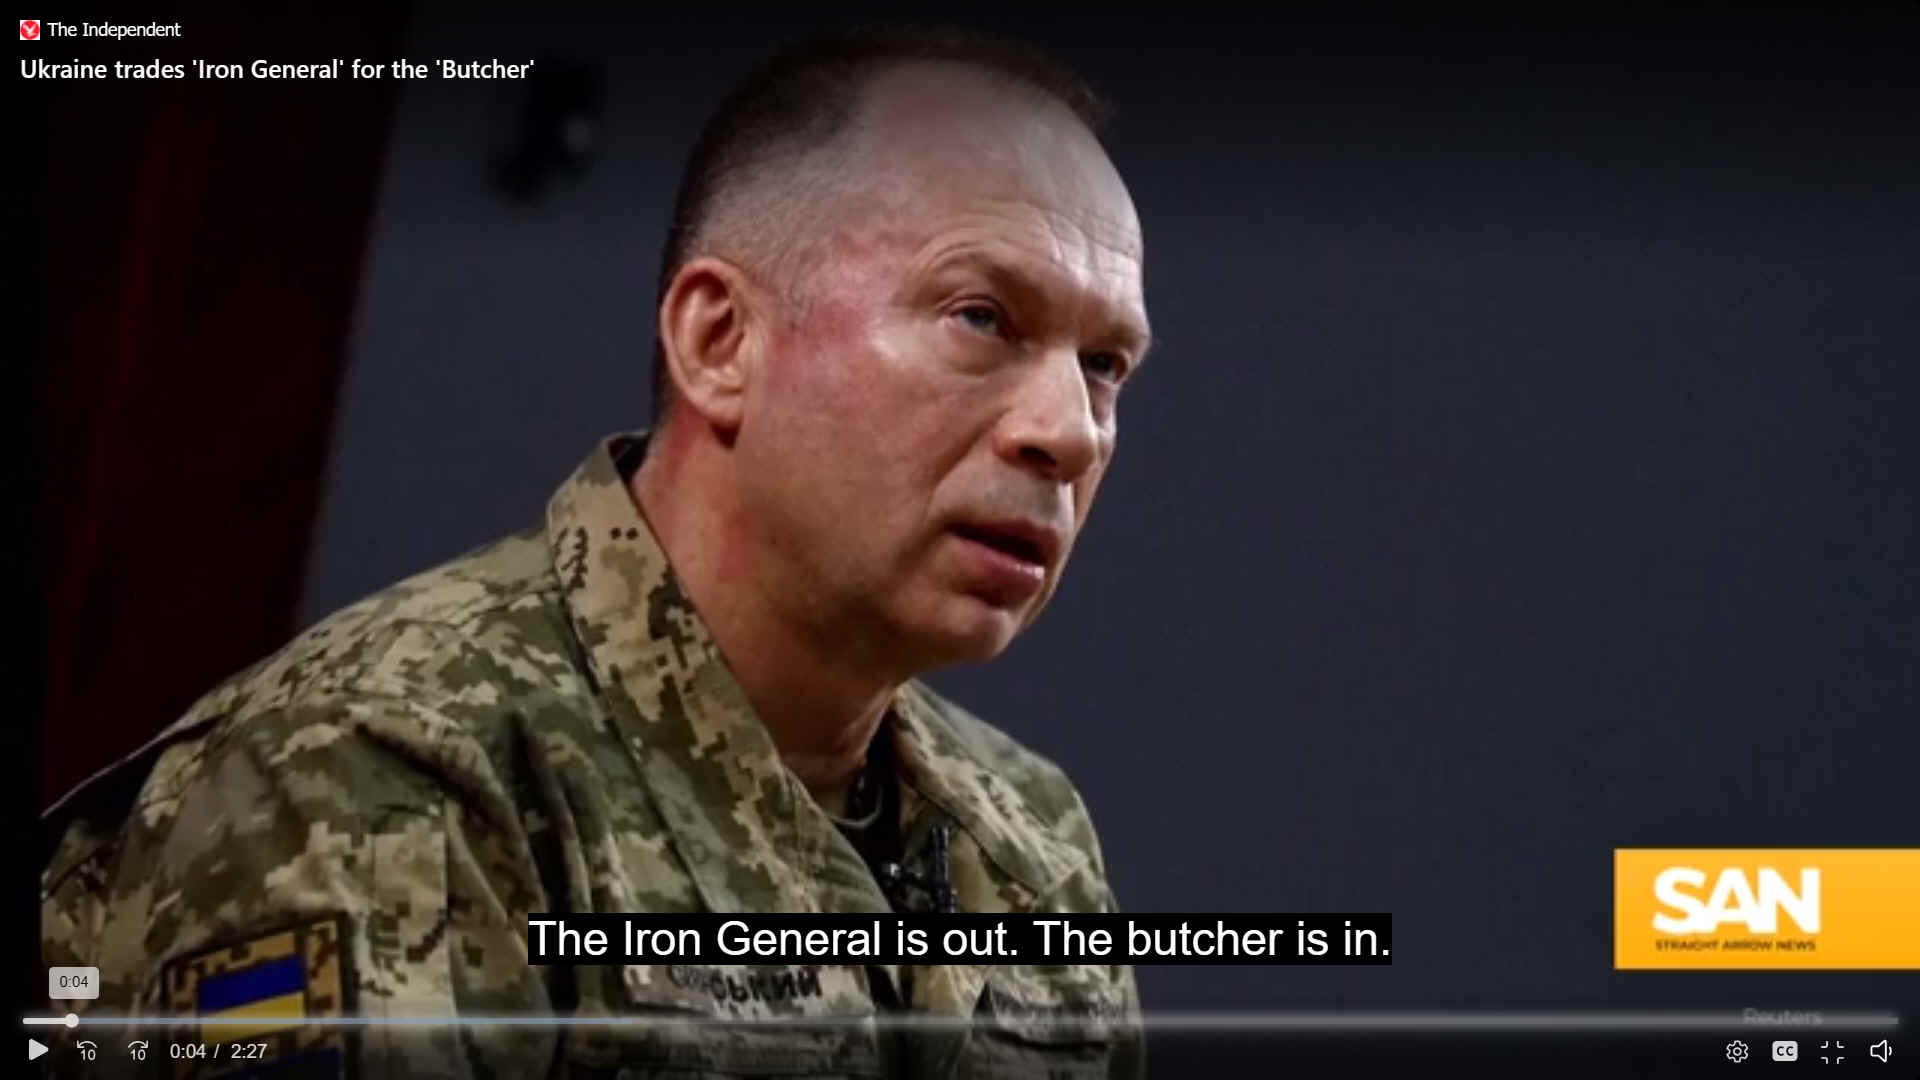 Ukraine's Iron General is replacedby the Butcher. General Oleksndr Syrskyi. To prevent Russia from gaining supremacy on the battlefield, NATO must share with Kyiv its most up-to-date training and warfighting lessons to make Ukrainian soldiers fit to counter the Russian military, Maj Gen Ryan believes. For sure Russia will take advantage inn the void in military aid. They are the chess masters of exploiting weaknesses.